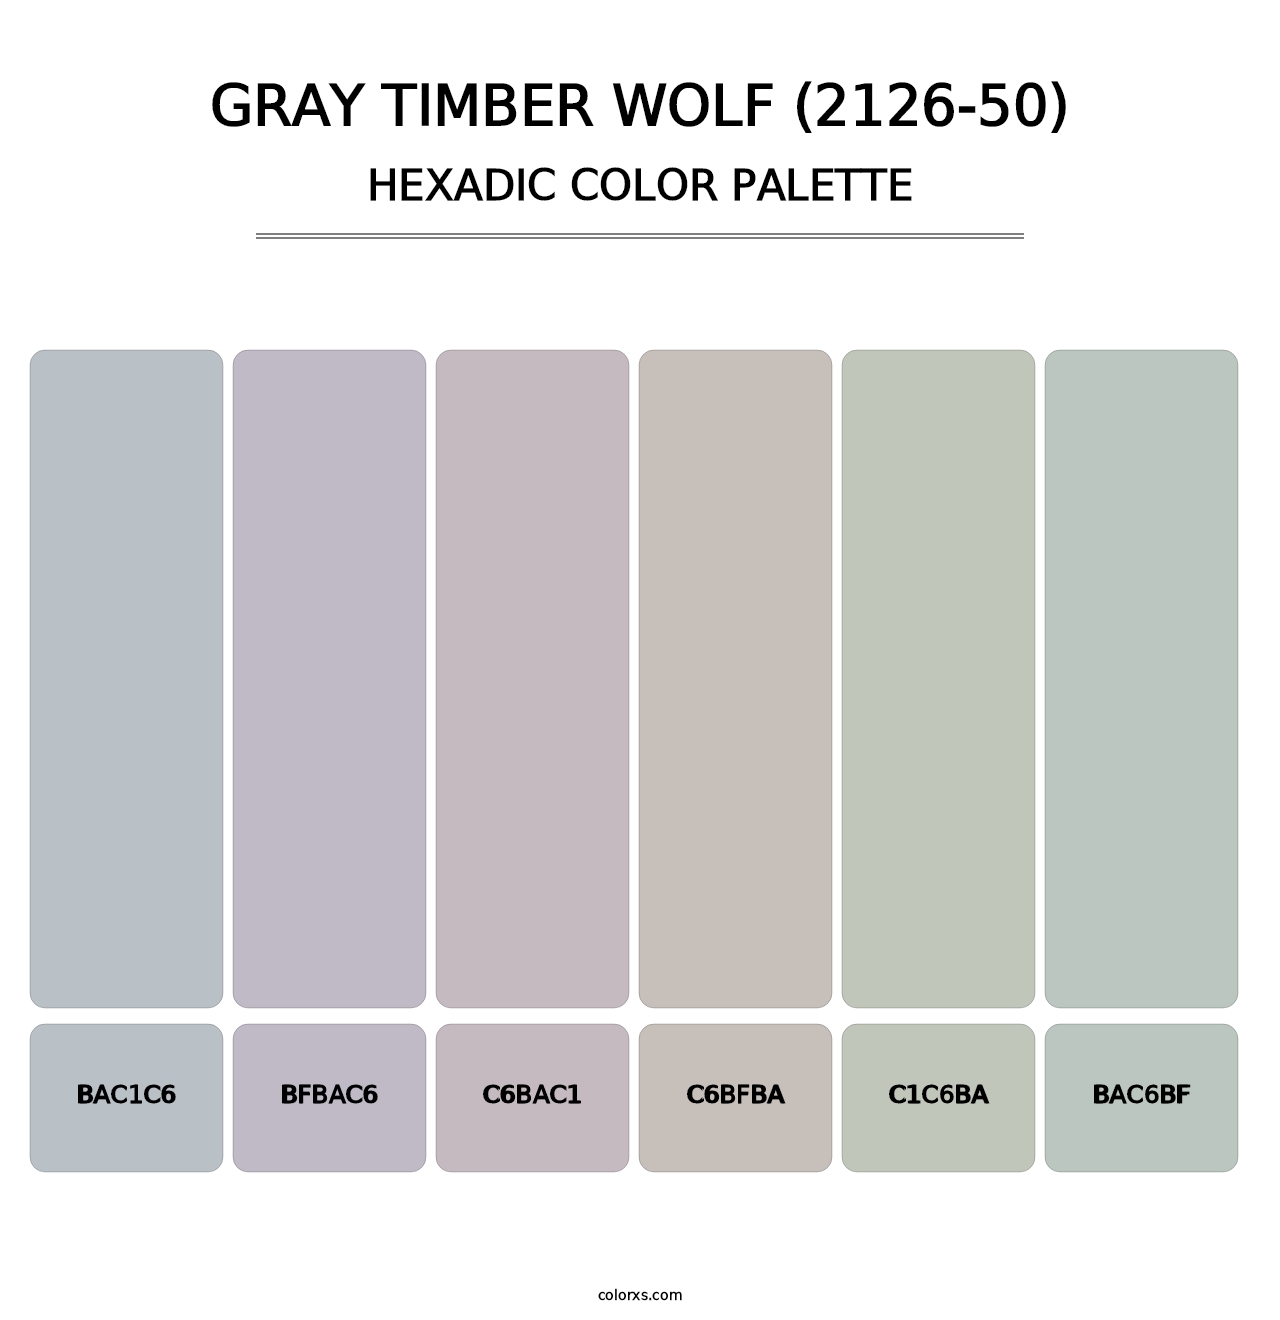 Gray Timber Wolf (2126-50) - Hexadic Color Palette